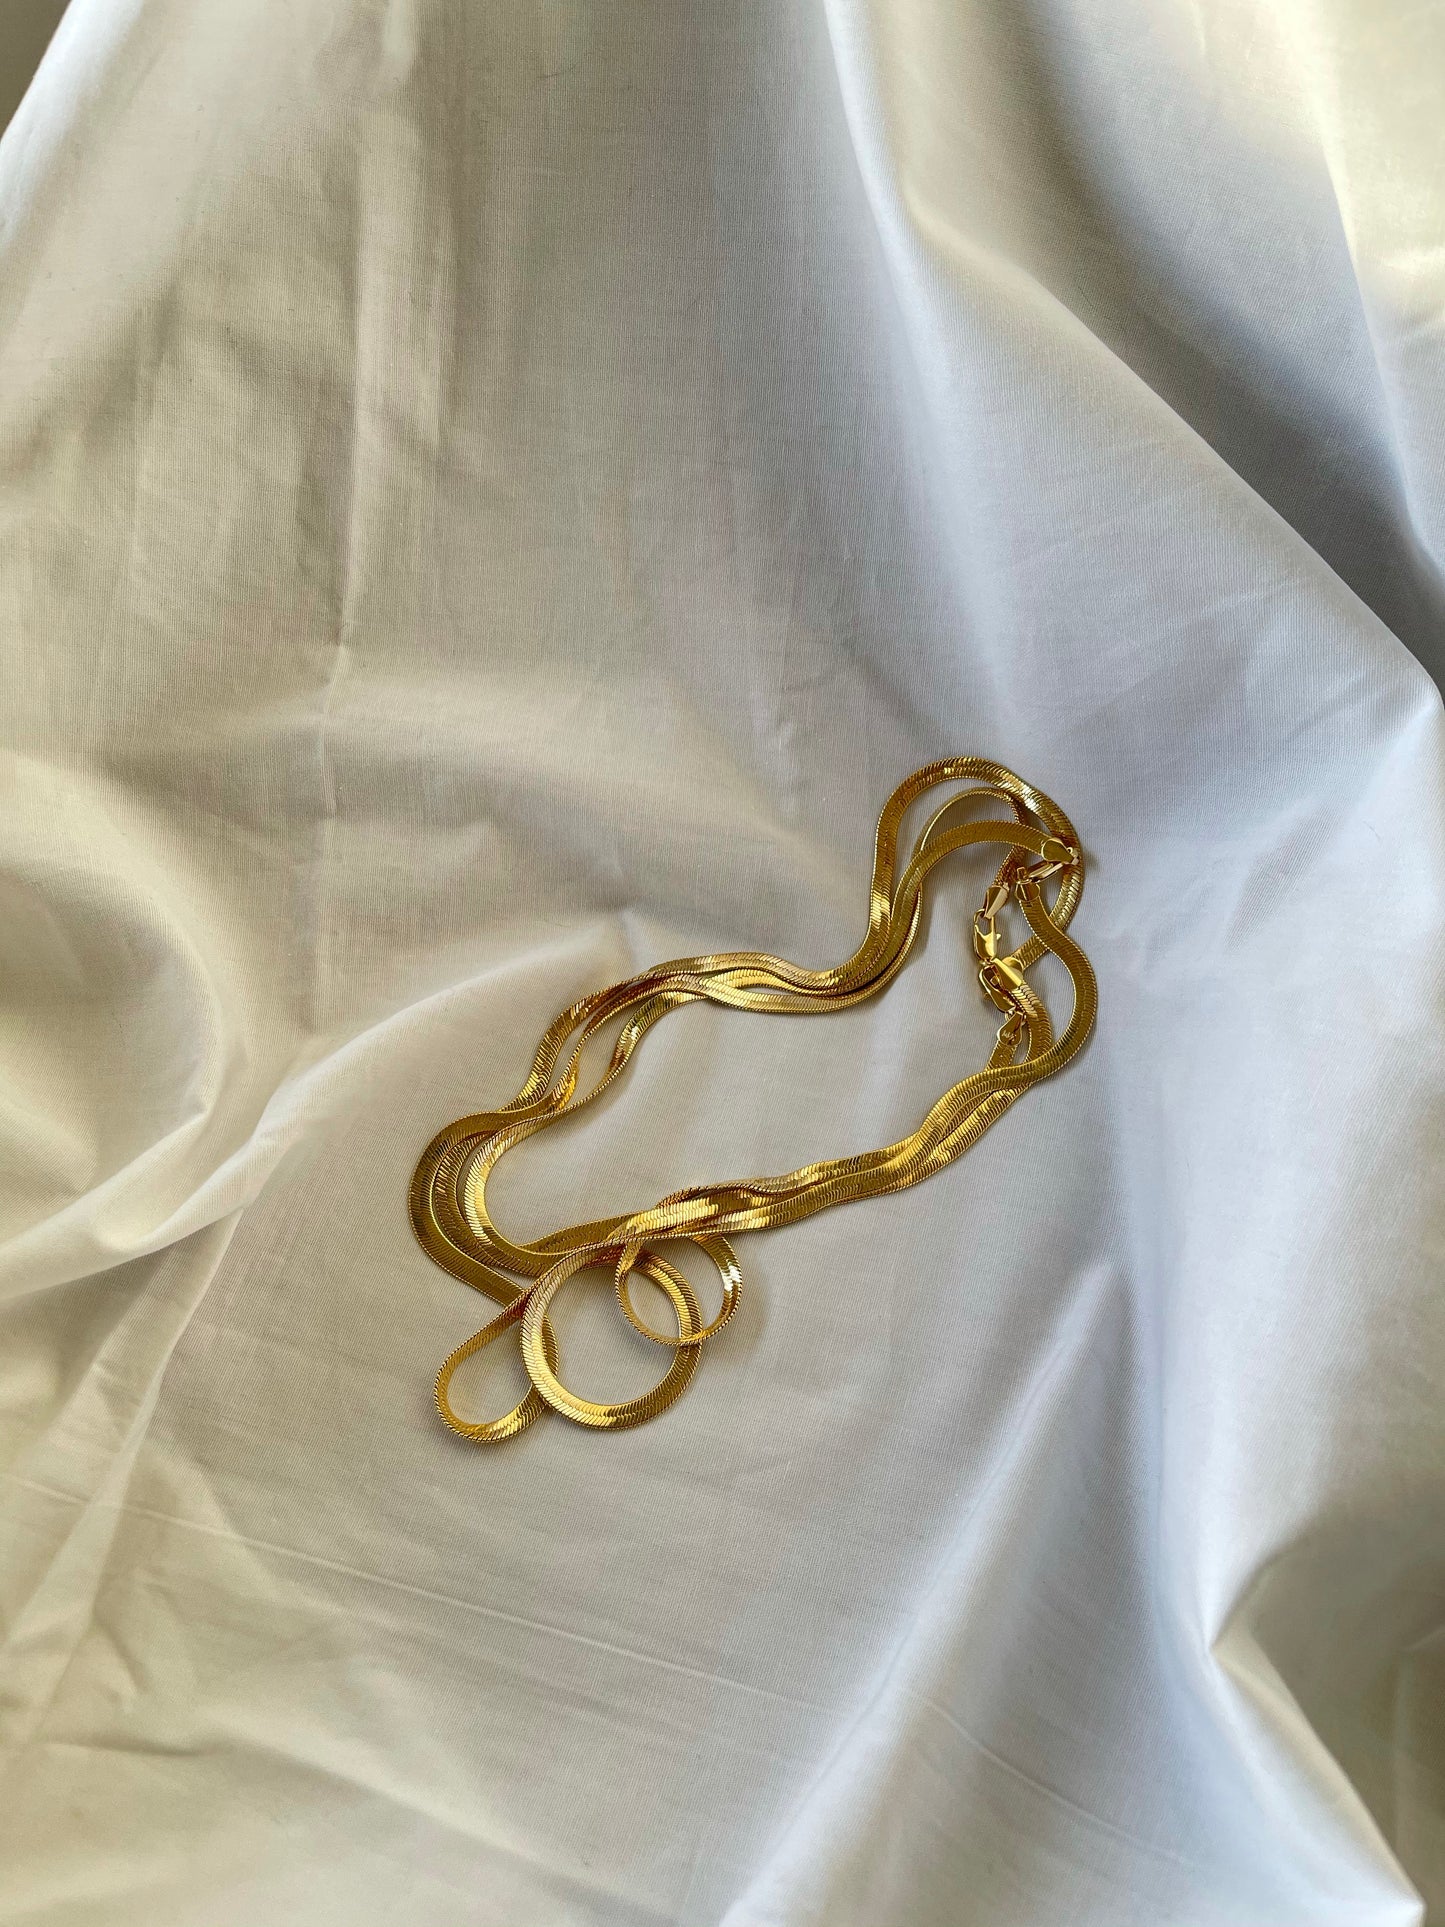 Single Flat 14k Plated Gold Snake Chain